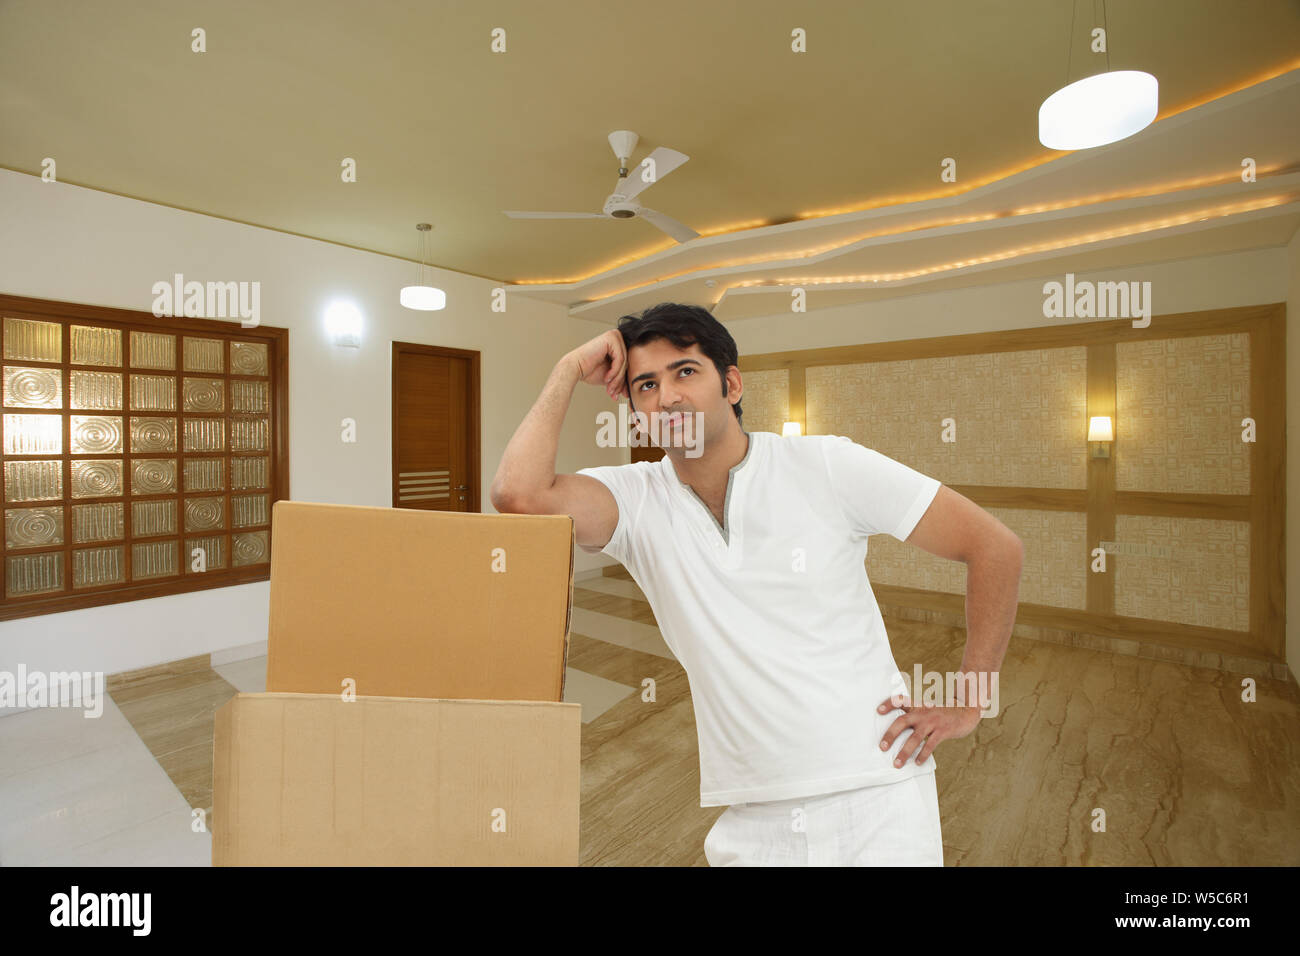 Man moving boxes into new home and day dreaming Stock Photo